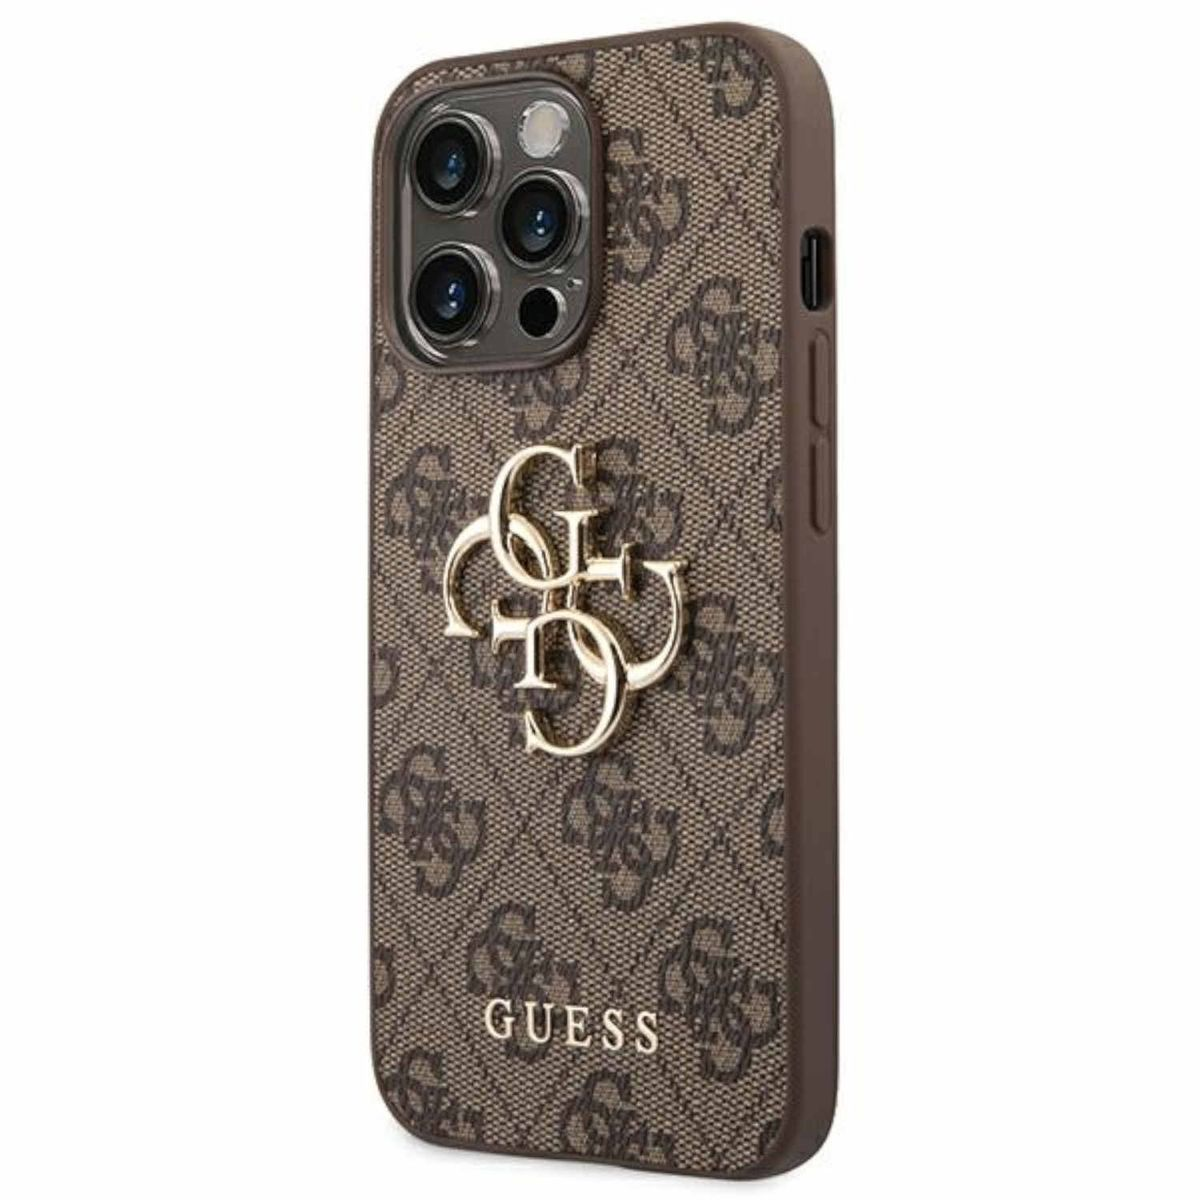 Apple, Pro 4G iPhone Max Big 14 Pro Angabe Backcover, Metal Max, GUESS 14 iPhone (Brown), Logo Case Keine